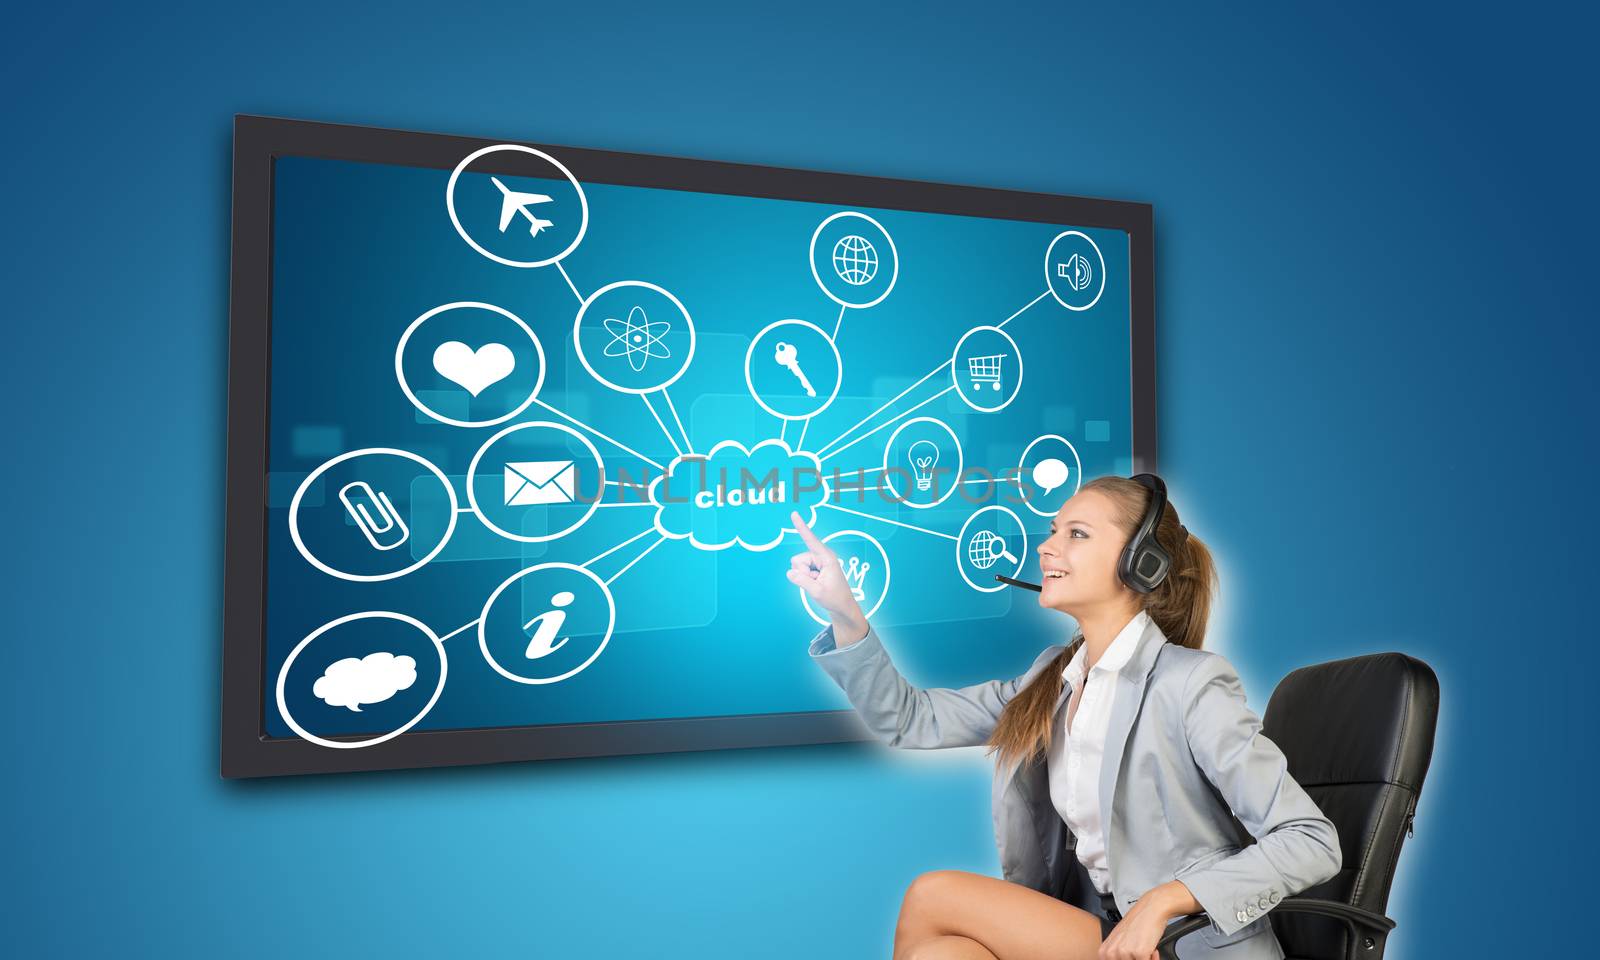 Businesswoman pressing Cloud button on touch screen interface with icons, on blue background. Element of this image furnished by NASA